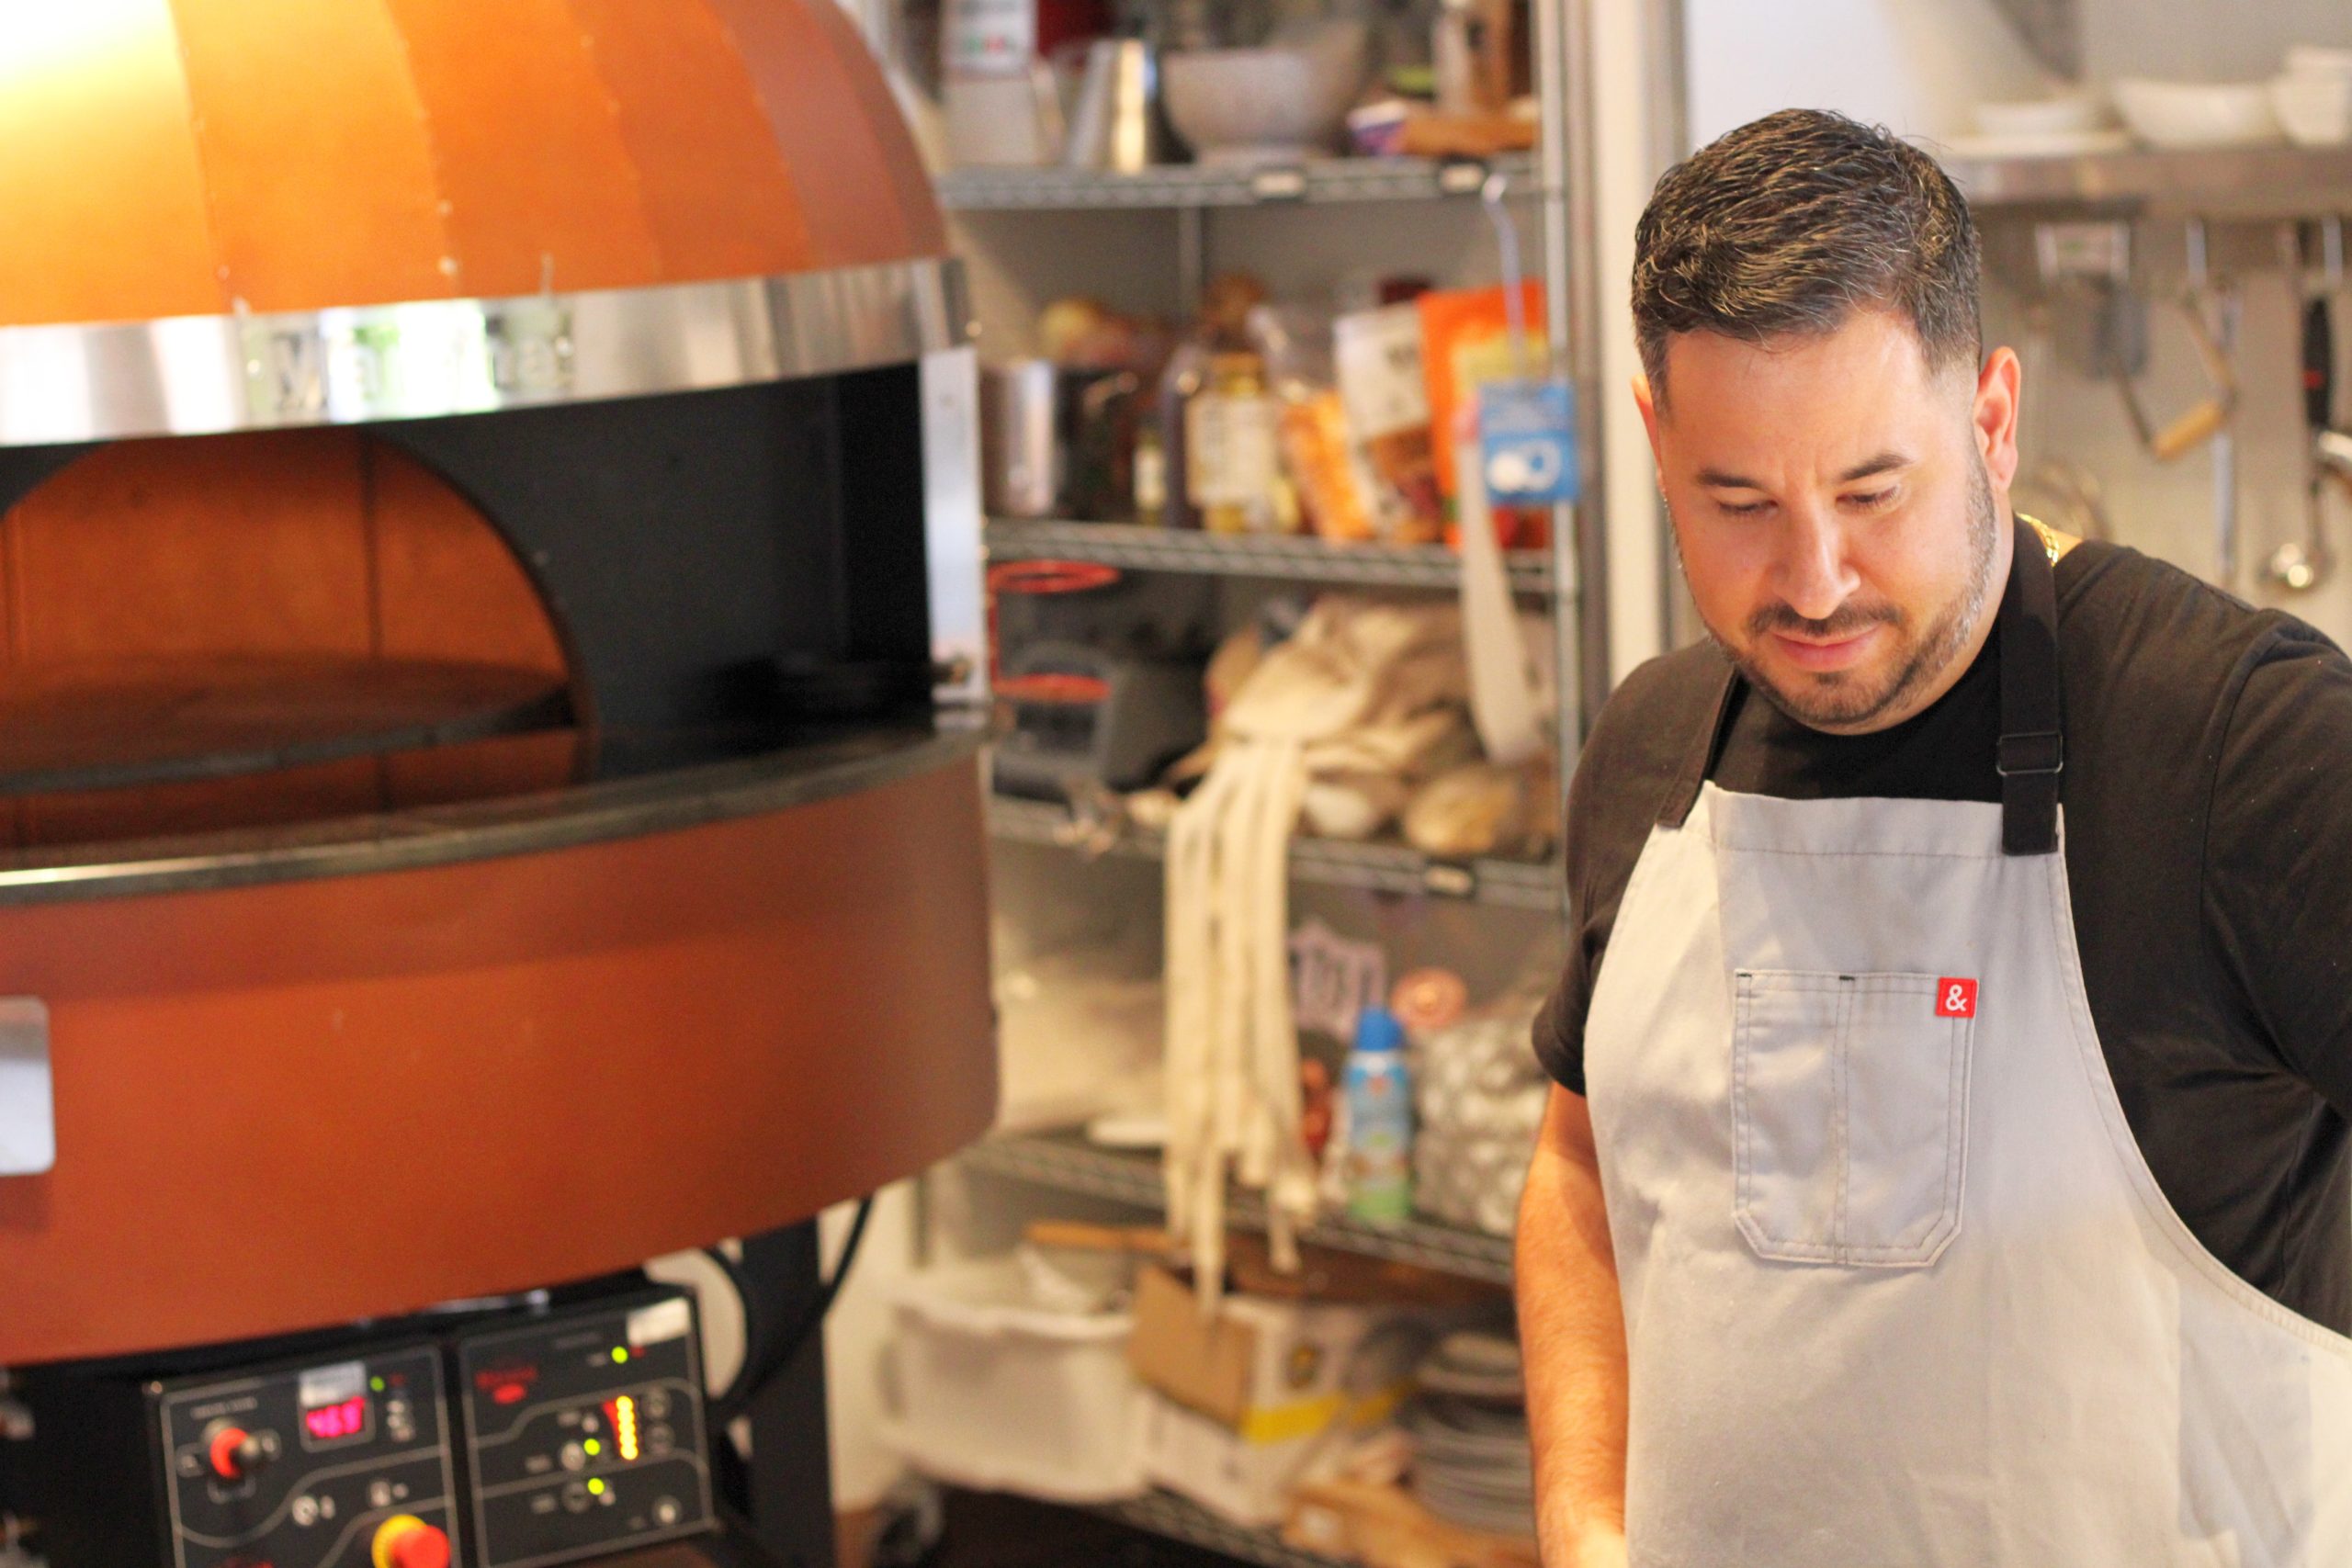 Custom-built oven from Italy at Ciao Down